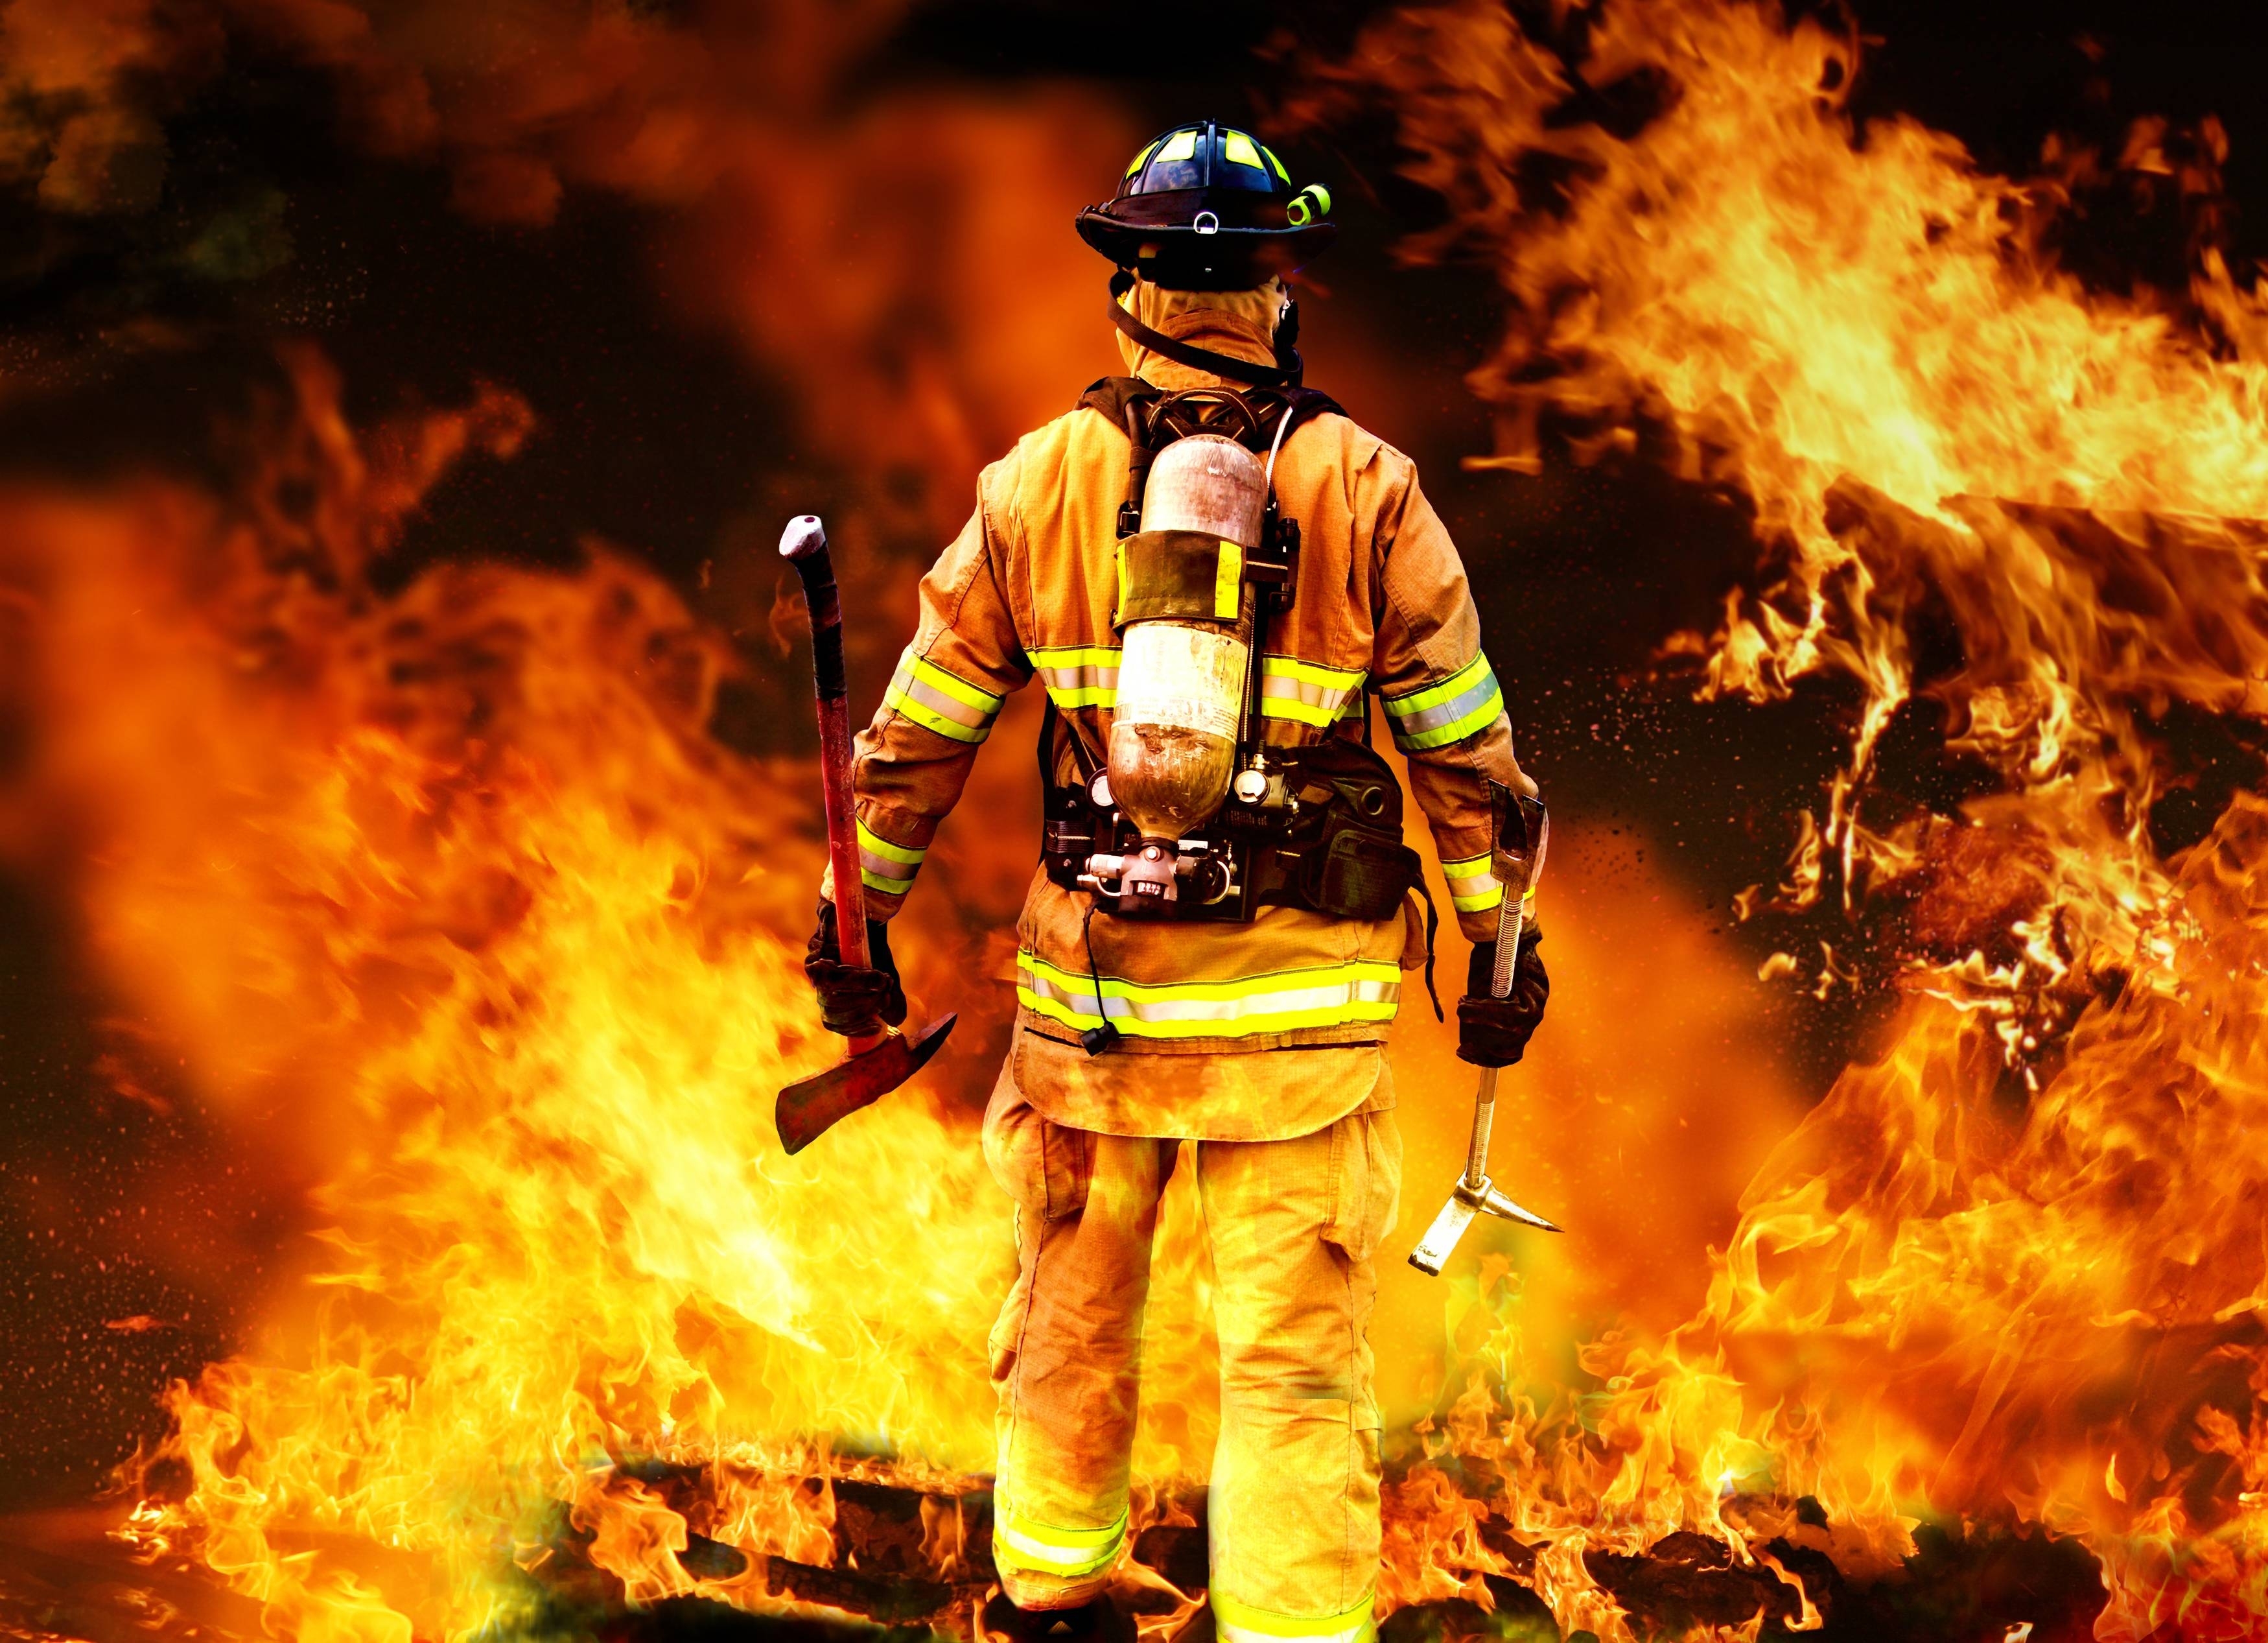 10 Most Popular Firefighter Wallpapers For Iphone FULL HD 1080p For PC